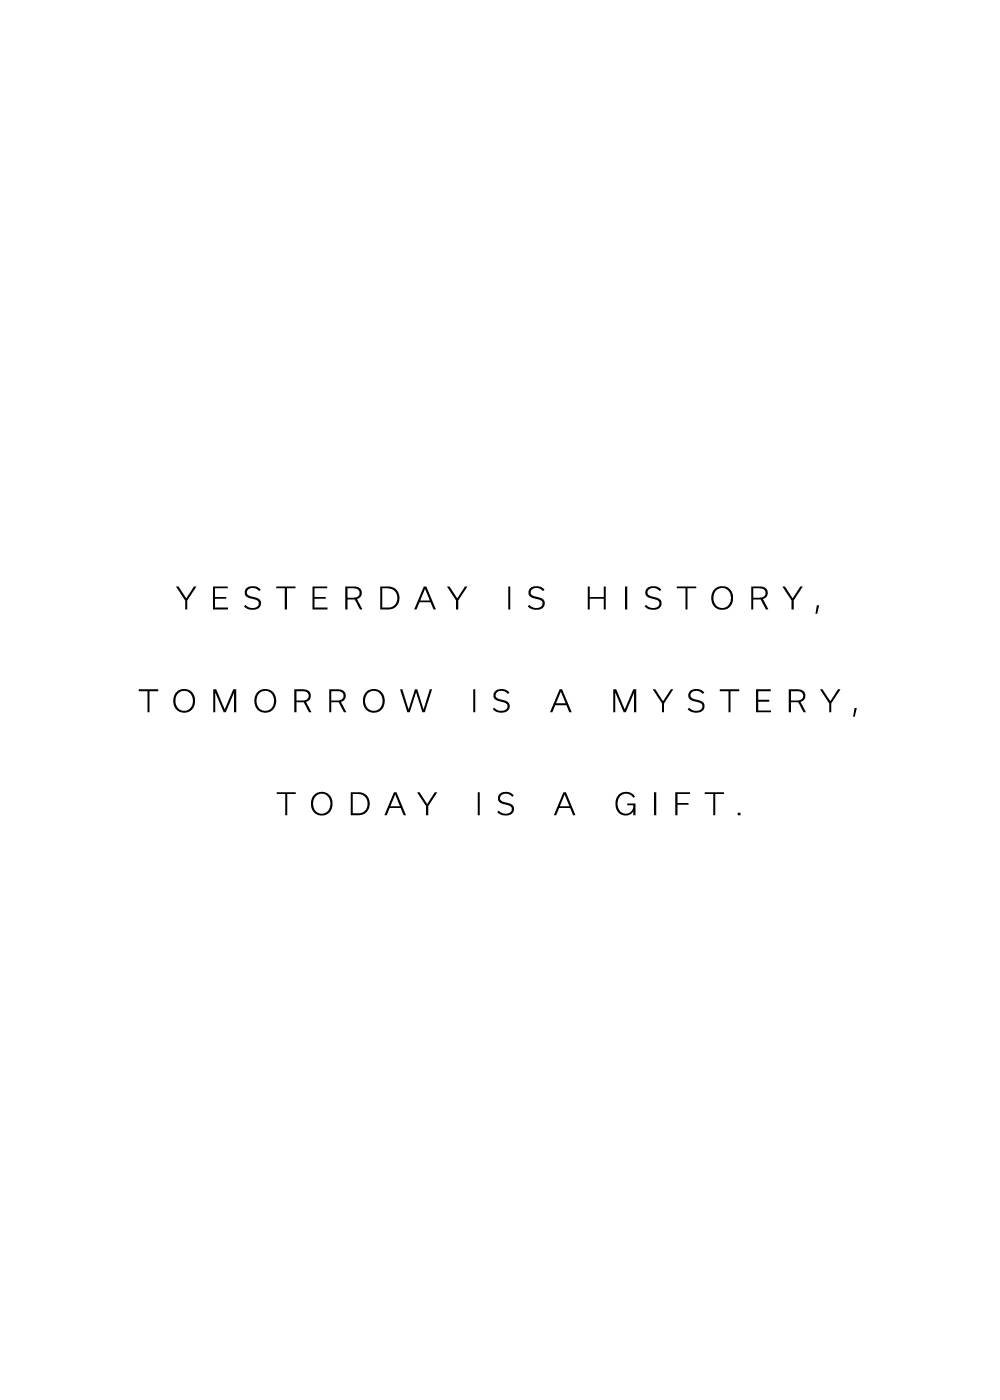 "Yesterday is history, tomorrow is a mystery, today is a gift" citatplakat